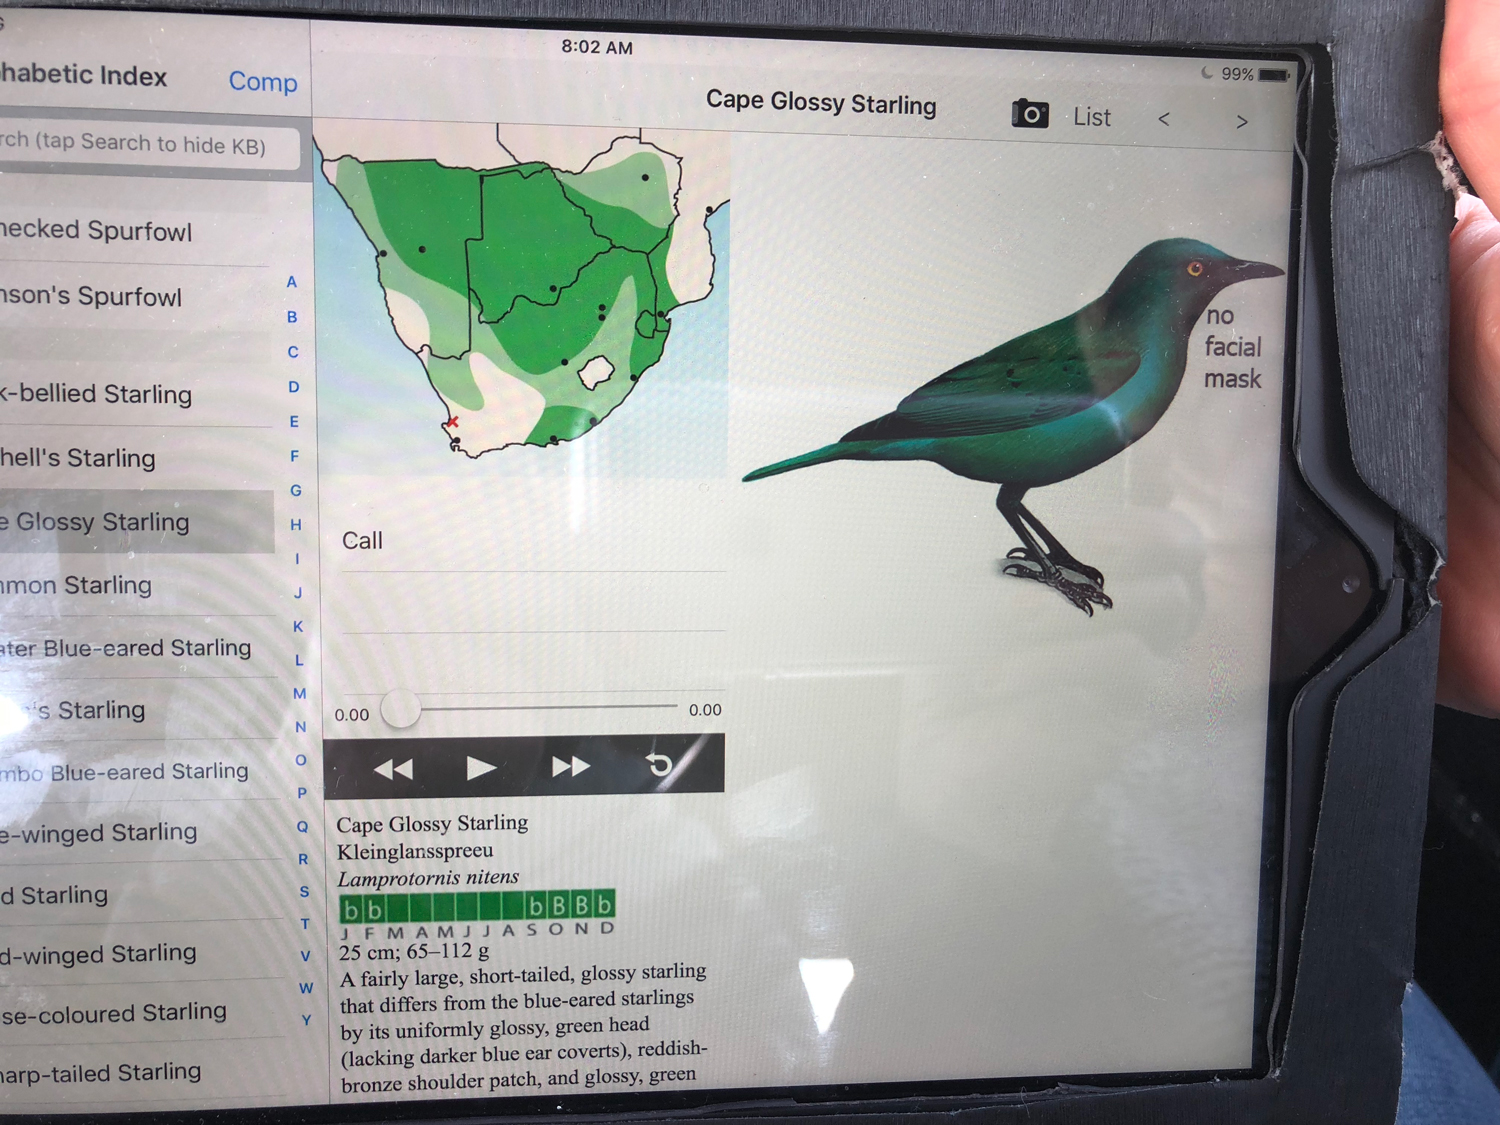 reading up on the Cape Glossy Starling